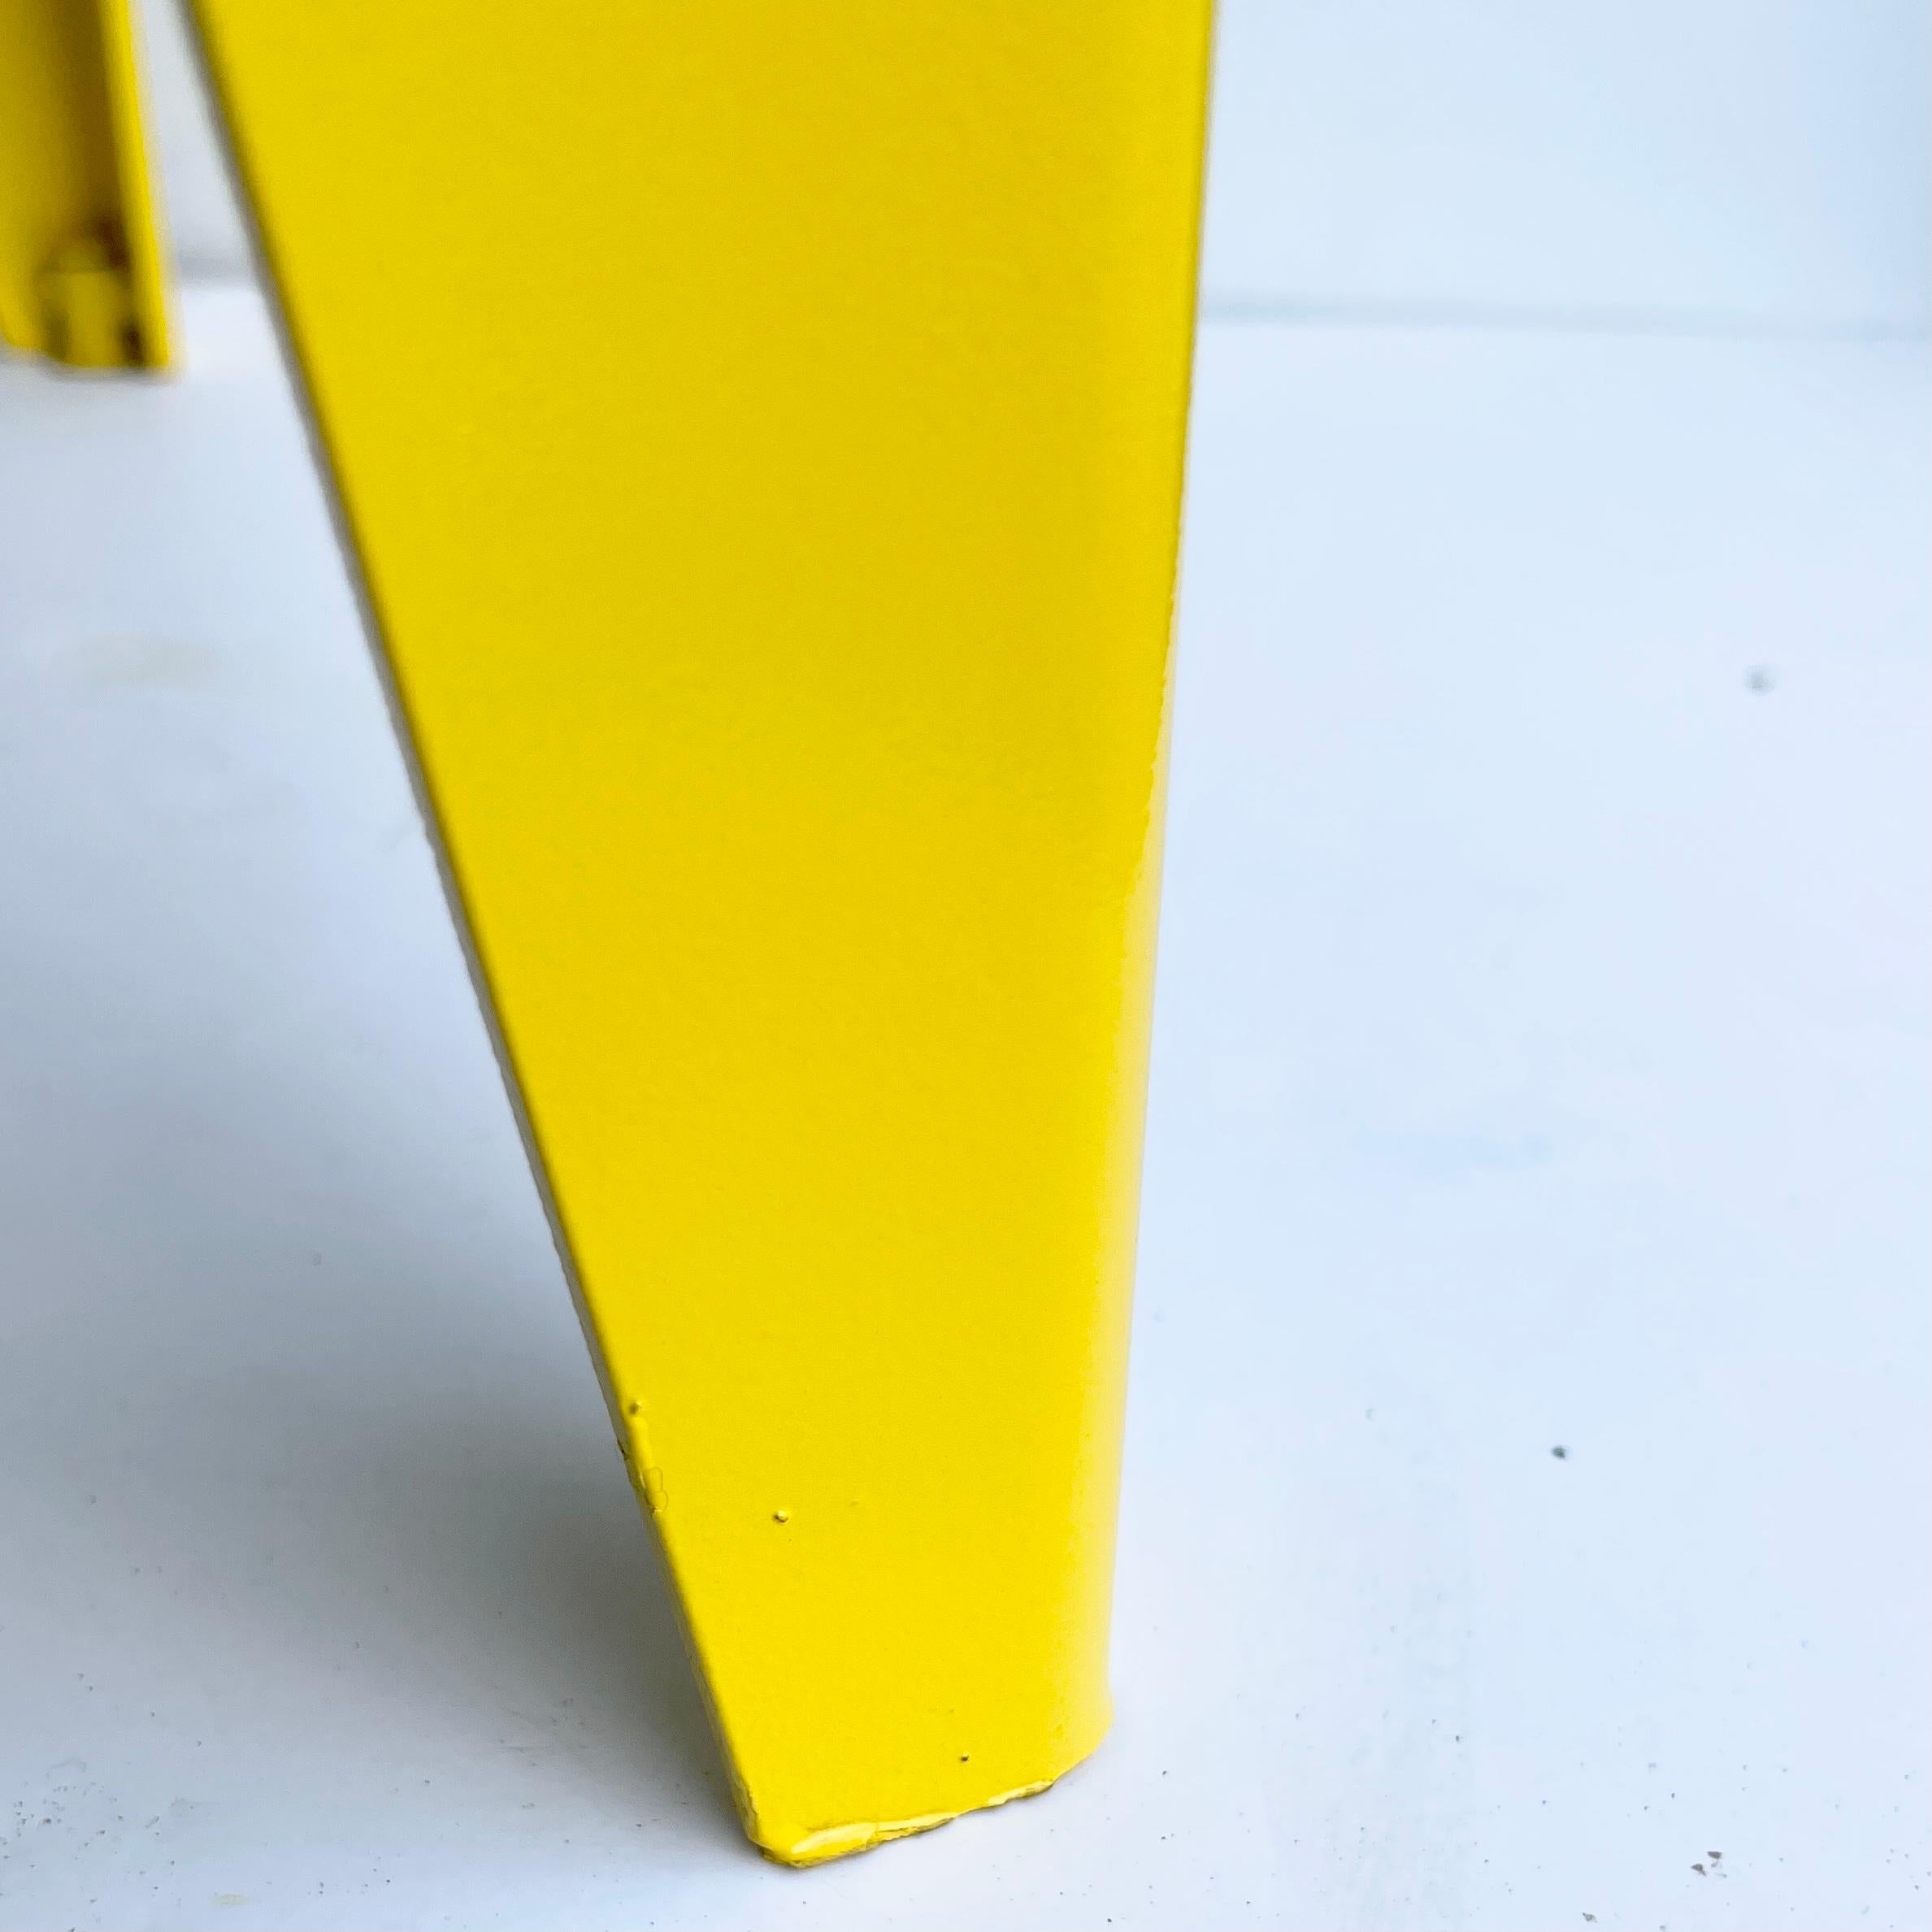 Italian Console Table with Glass Top, Powder Coated Yellow, Mid-Century Modern 2